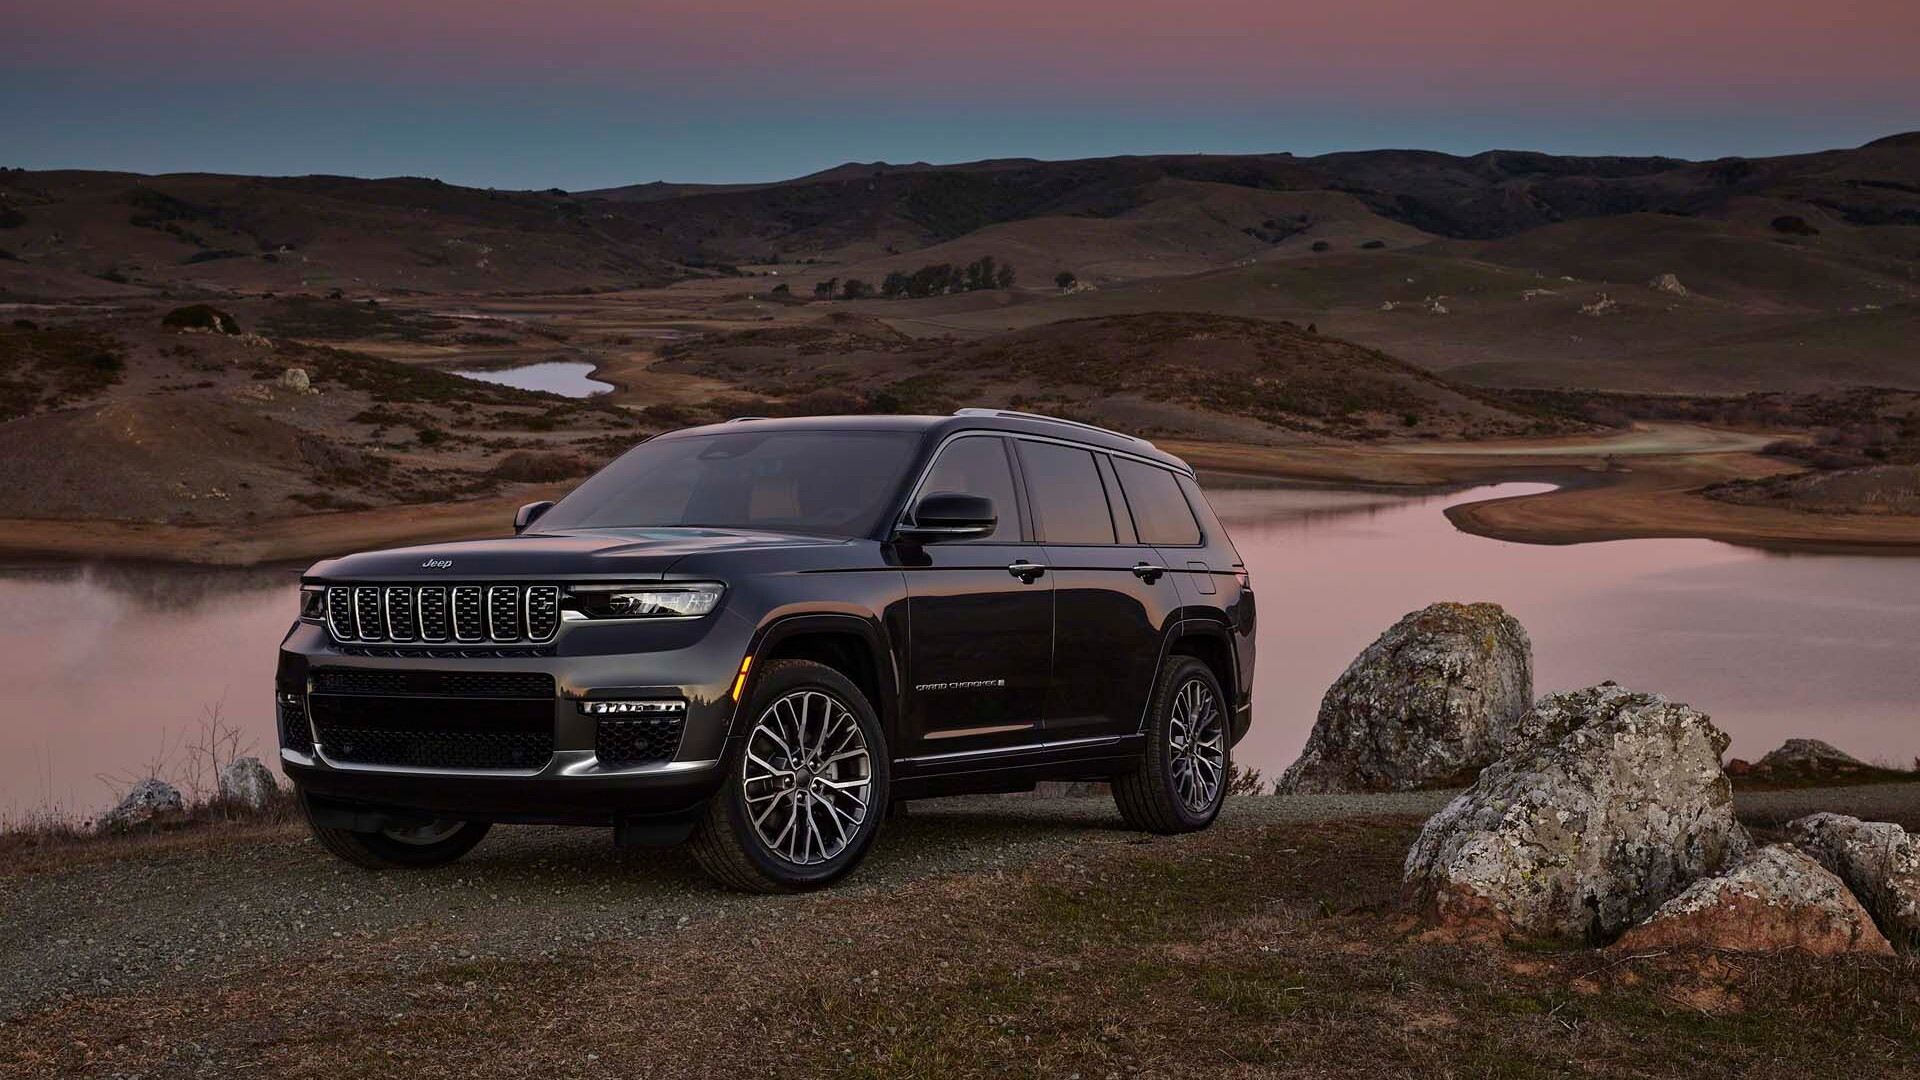 Preview 21 Jeep Grand Cherokee L Is An Impressive 3 Row Suv Priced From 38 690